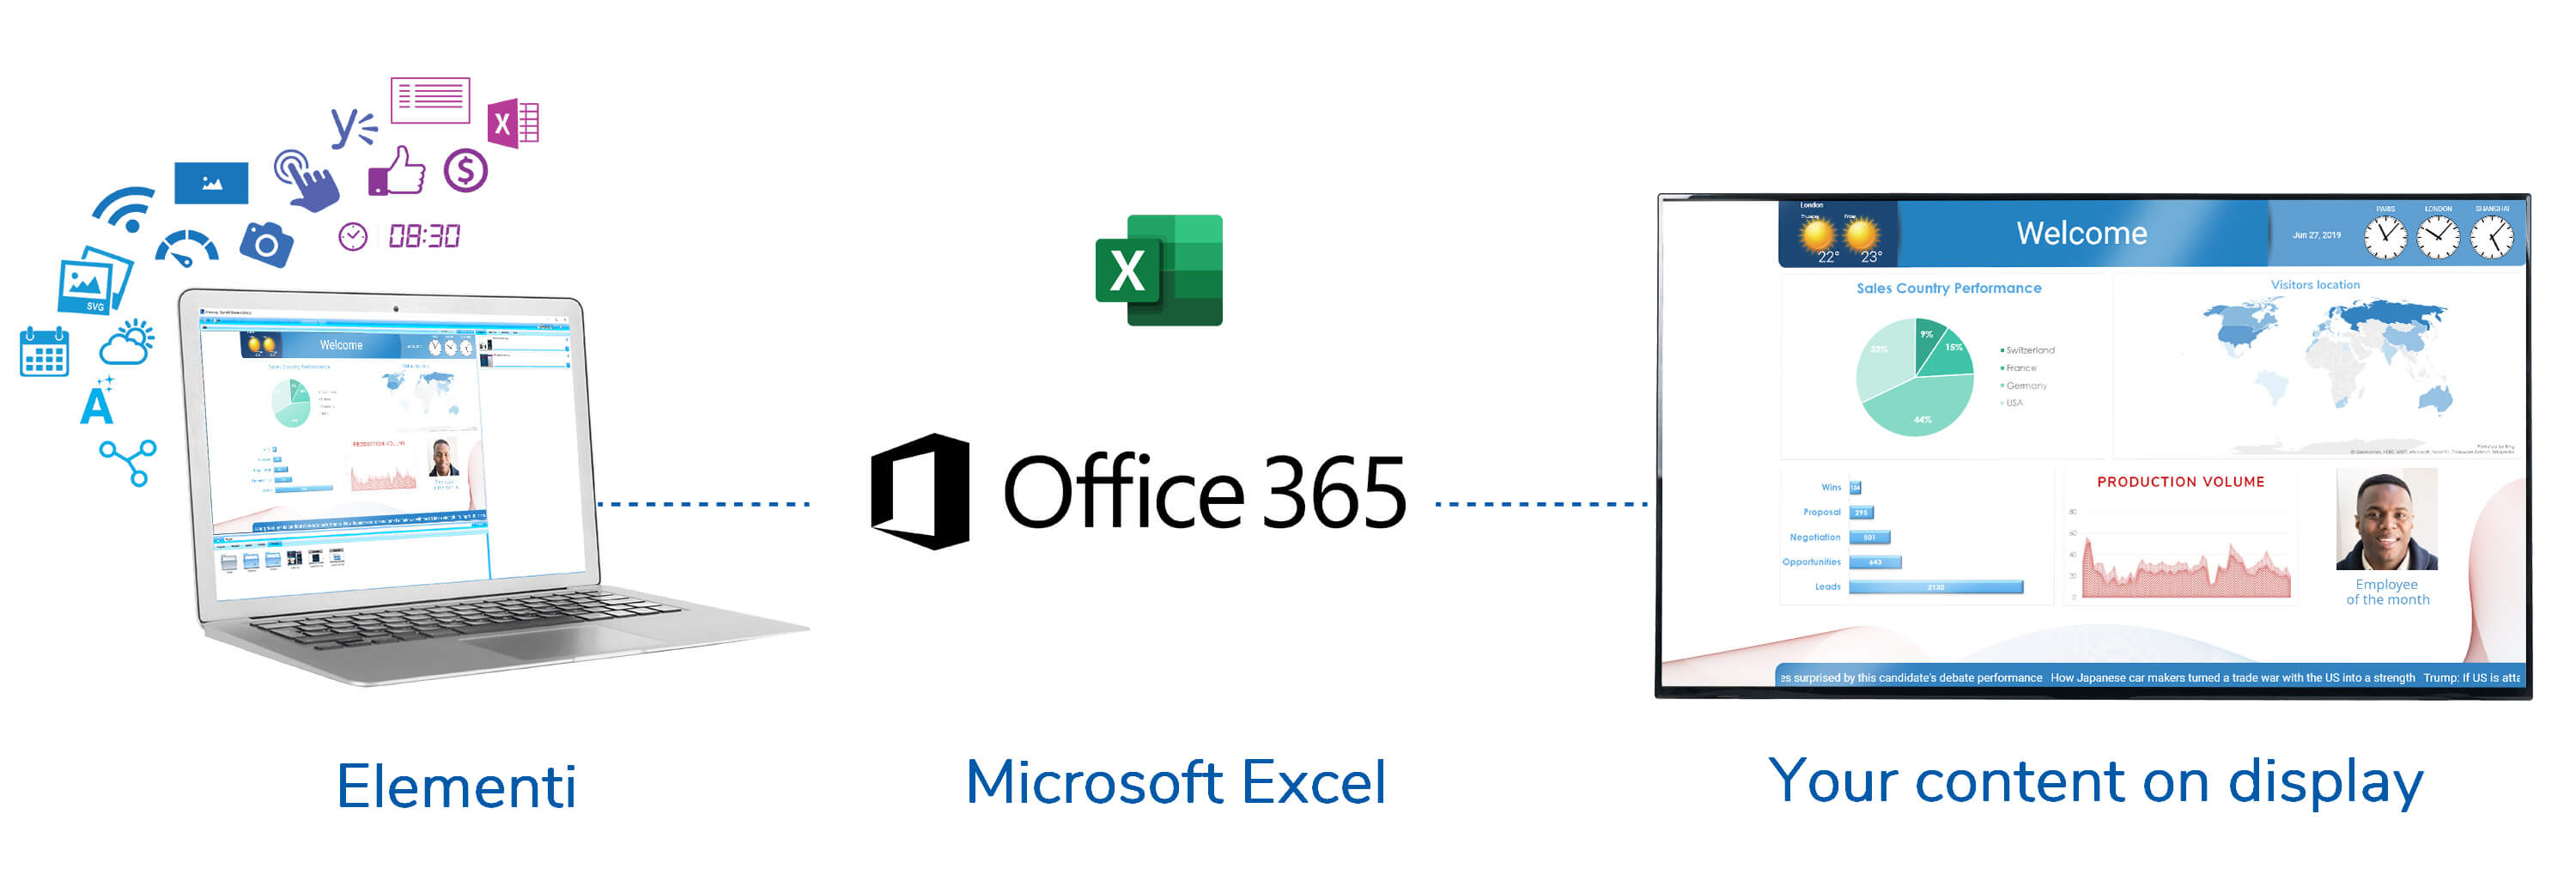 elementi digital signage software integration with microsoft office excel online